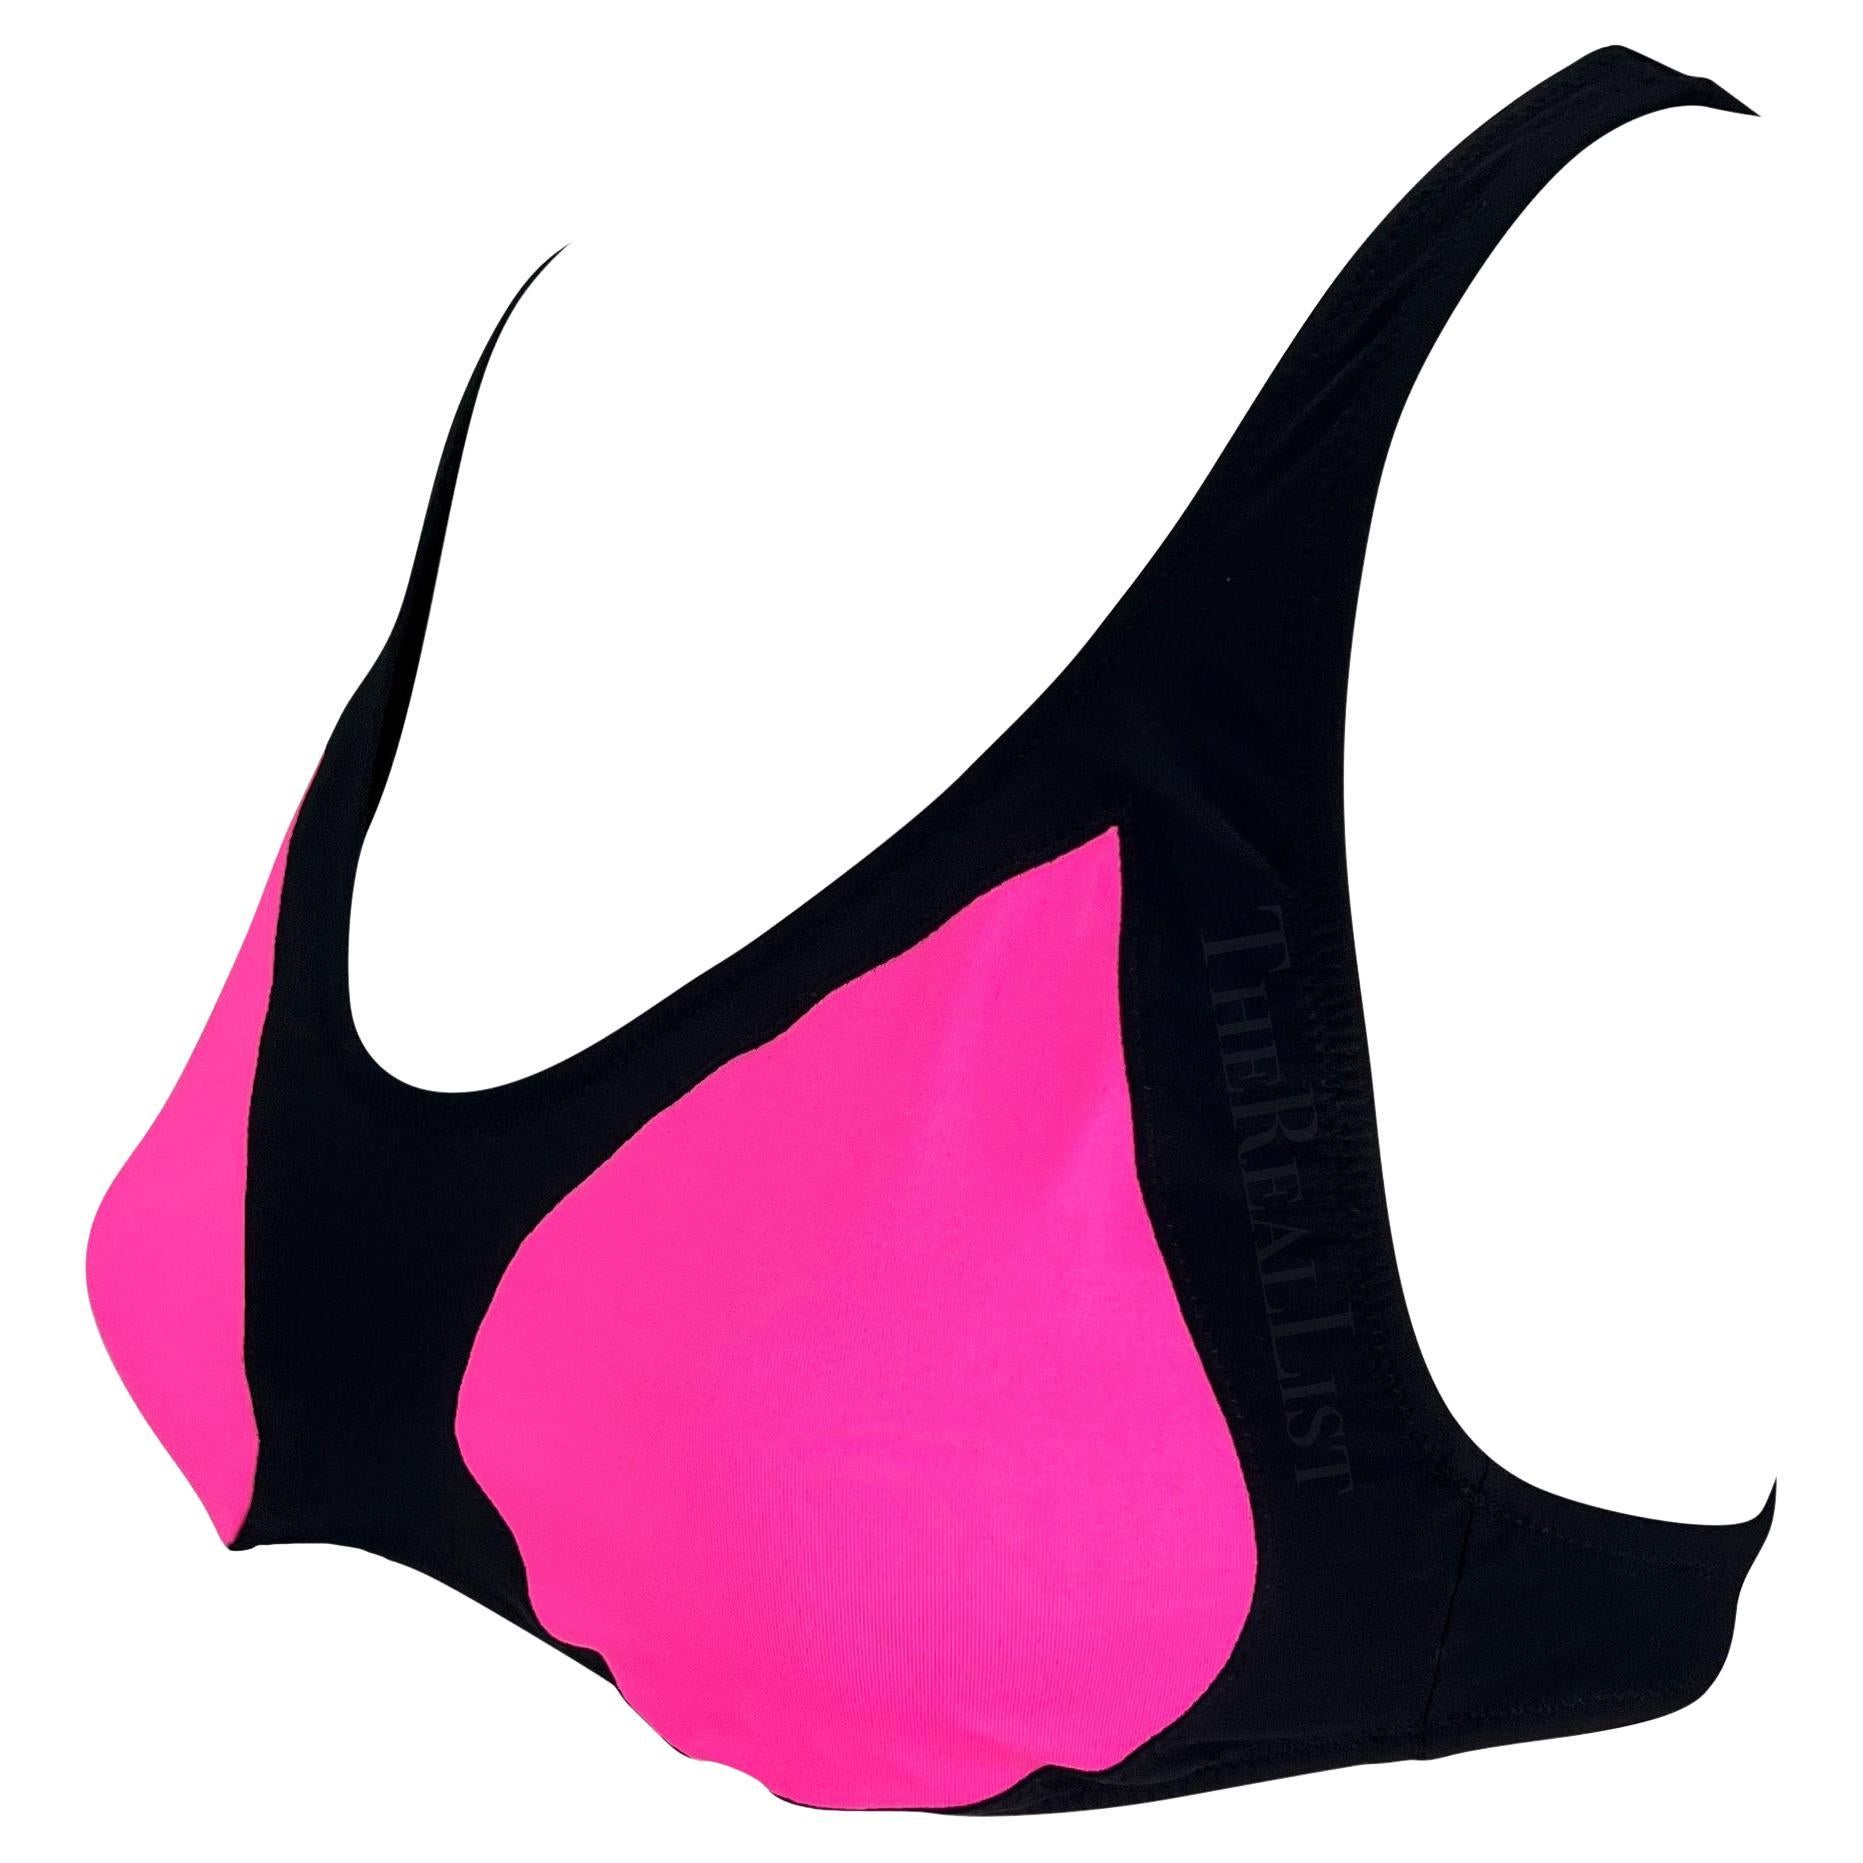 Presenting a fabulous black and hot pink Alexander Mcqueen bikini/bralette top. From the Resort 2009 collection, a similar bathing suit debuted on the season's runway, modeled by Michaela Kocianova. This black bikini top boasts striking hot pink